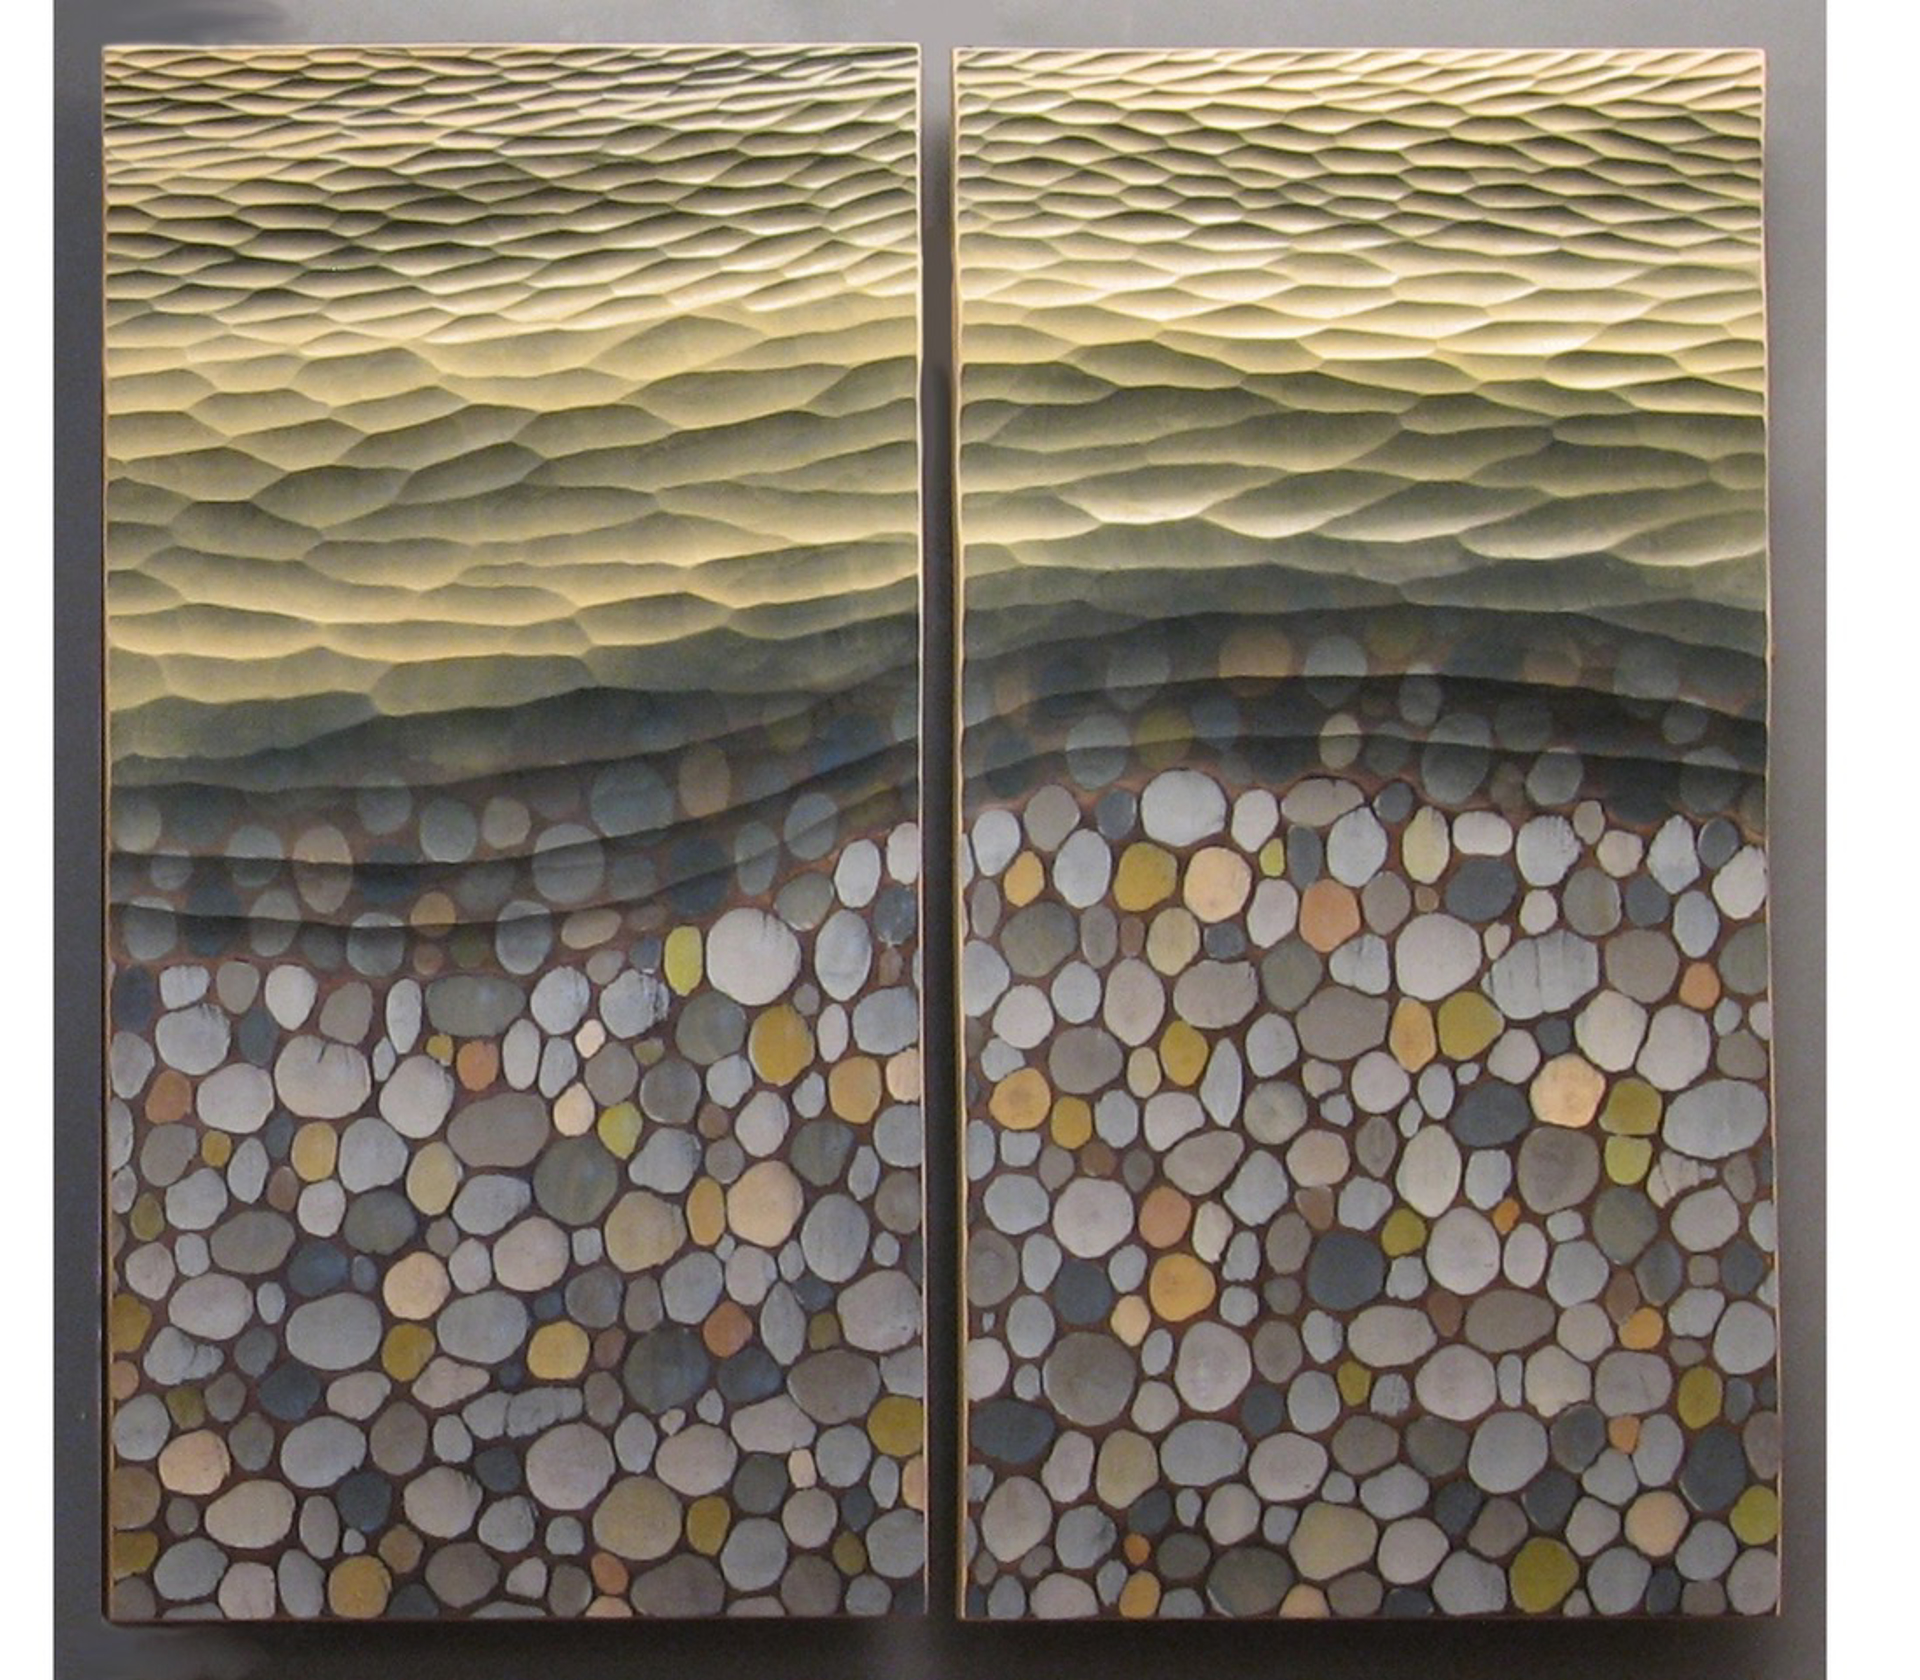 Waves and Pebbles Dyptich by Michael Bauermeister